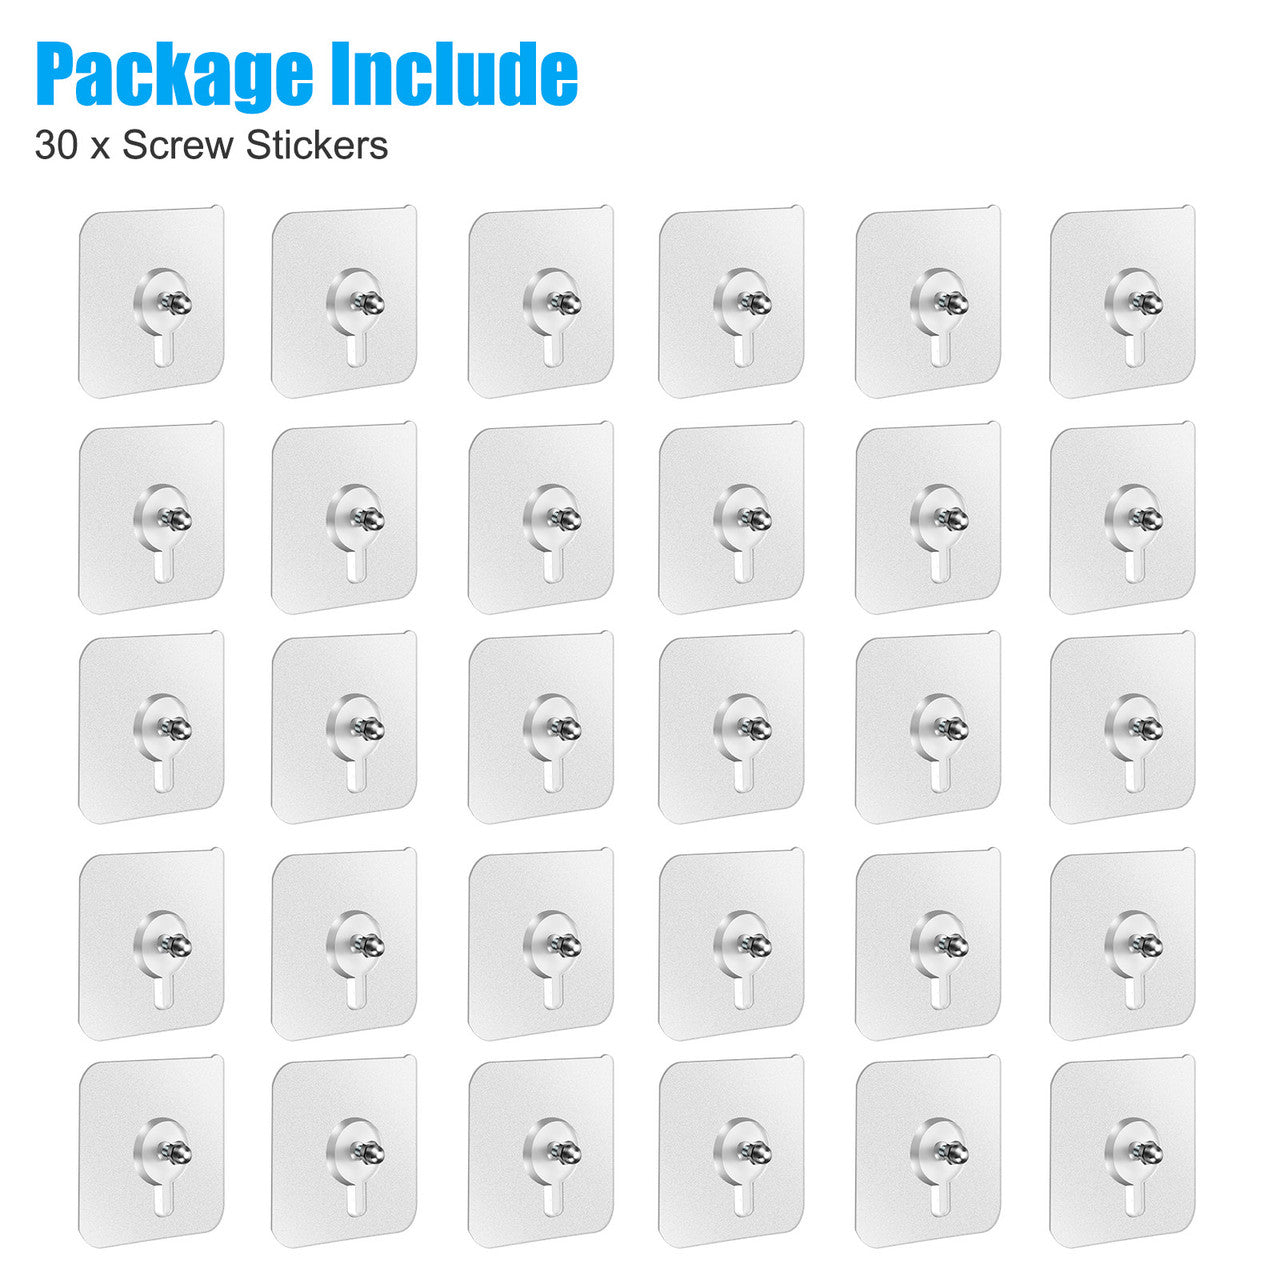 30 Pcs Free Punching Seamless Screw Sticker - Adhesive Wall Hooks for Photo Frame Bathroom Kitchen Home Office (Clear)